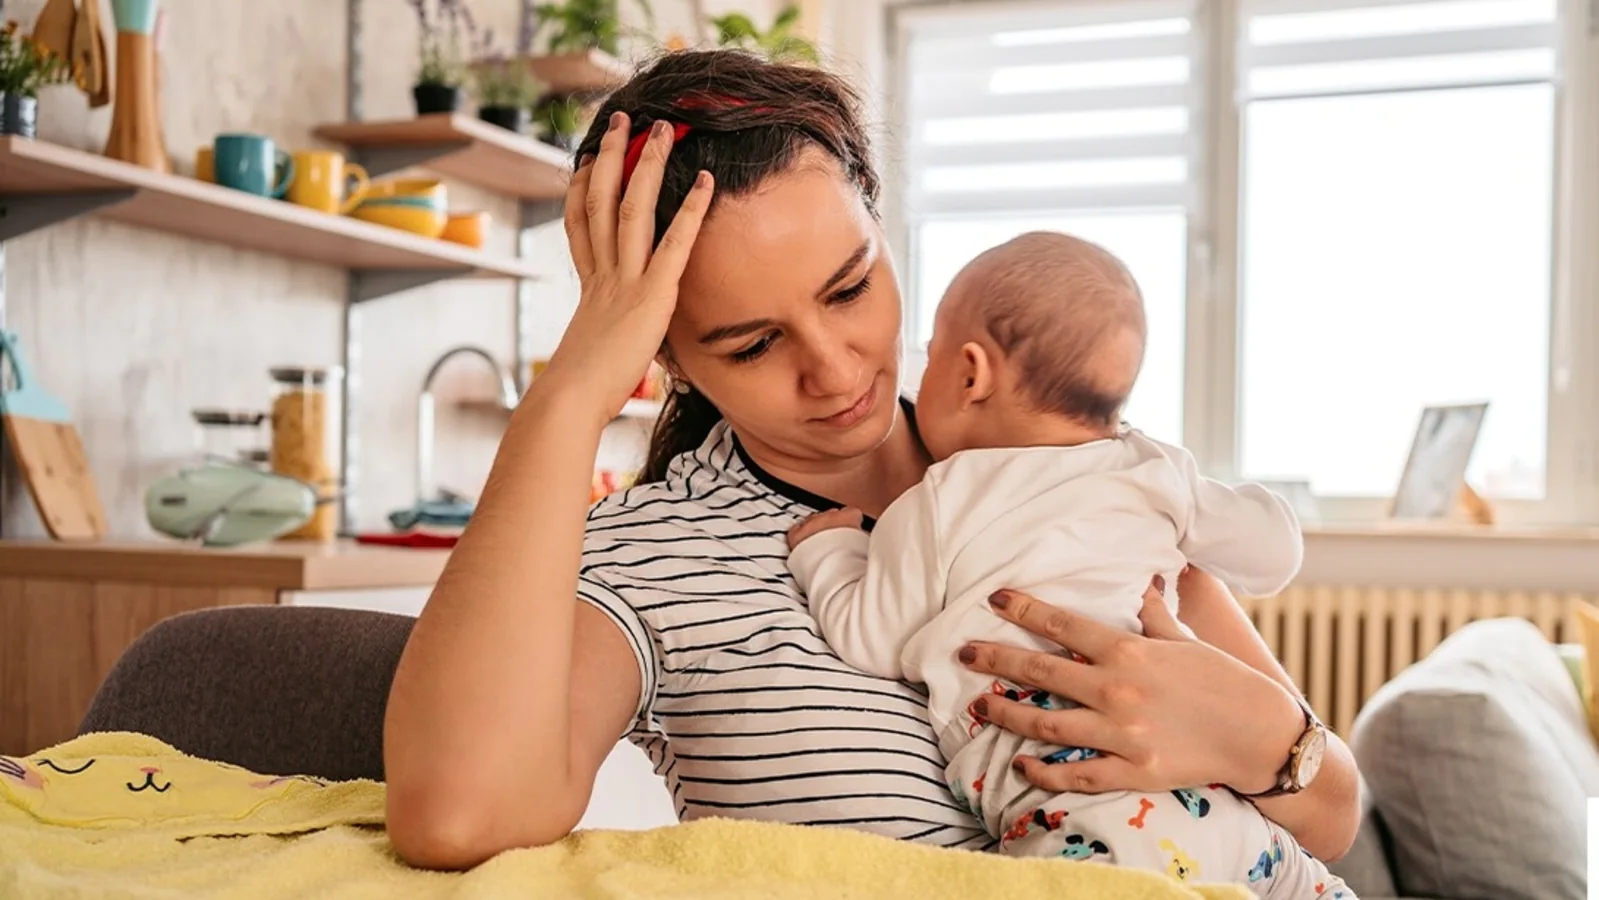 Postpartum depression in young mothers: Tips on early identification, management